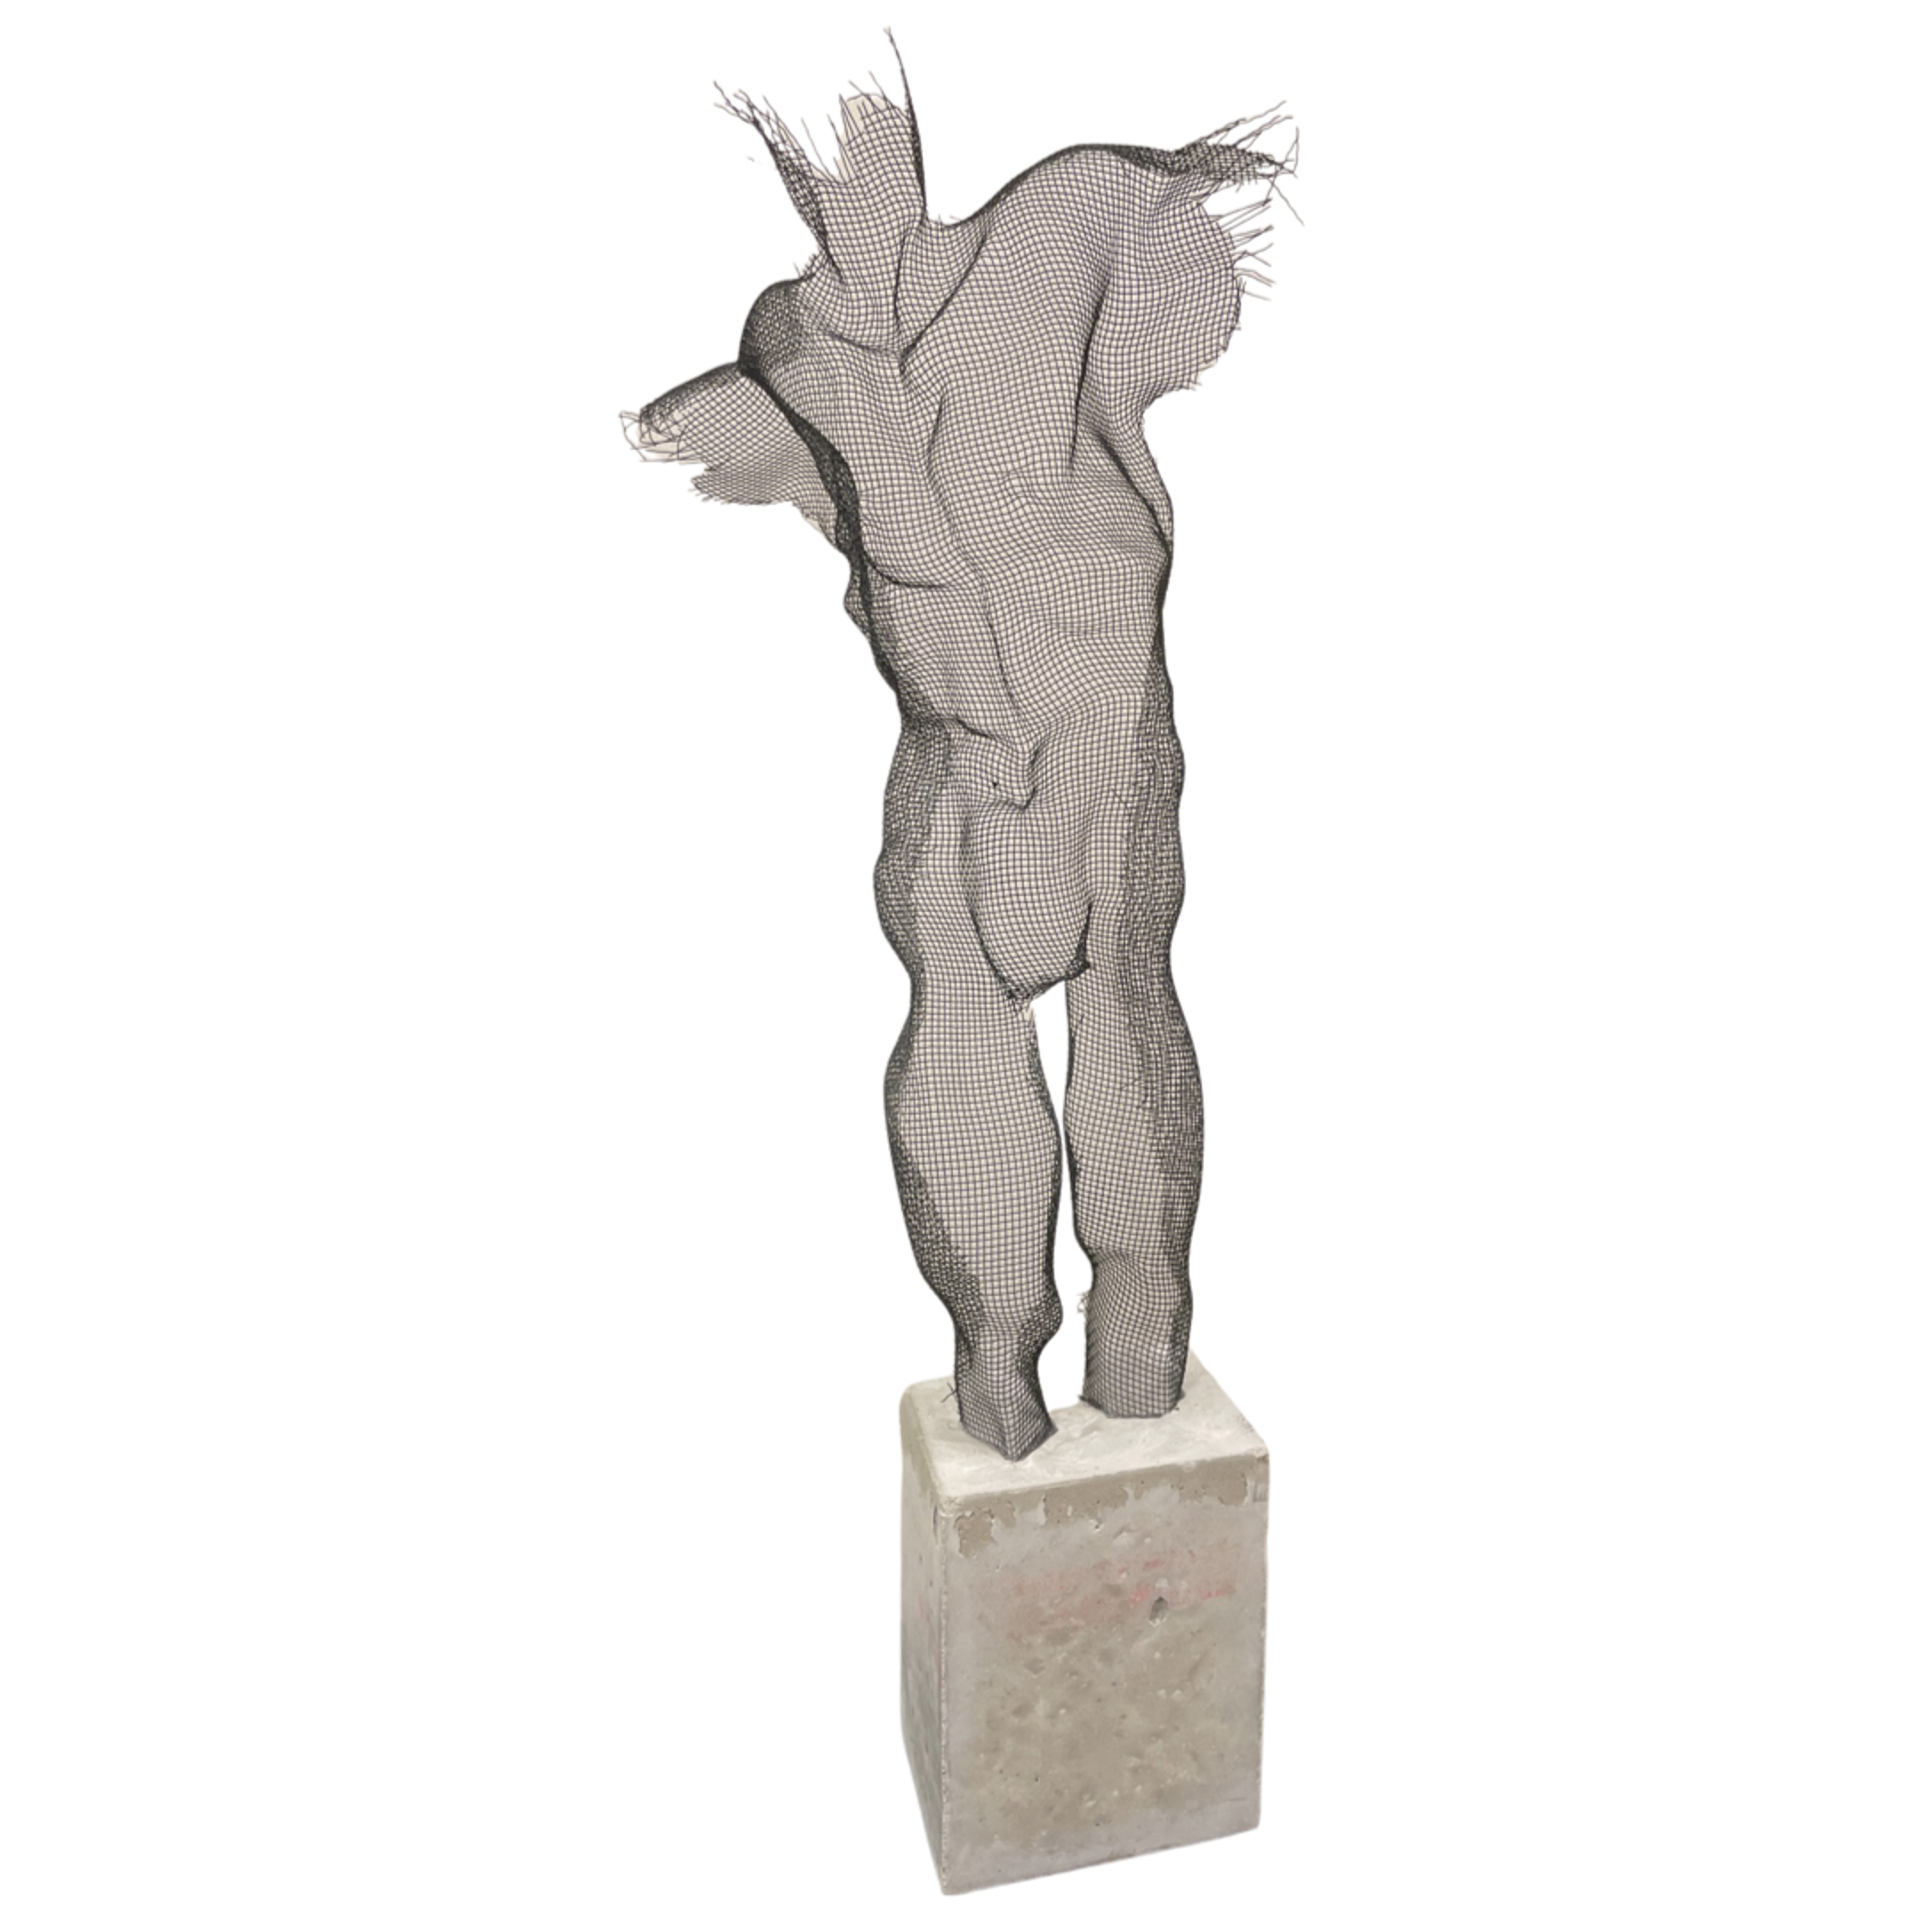 Mesh Male Small Sculpture by Ofer Rubin